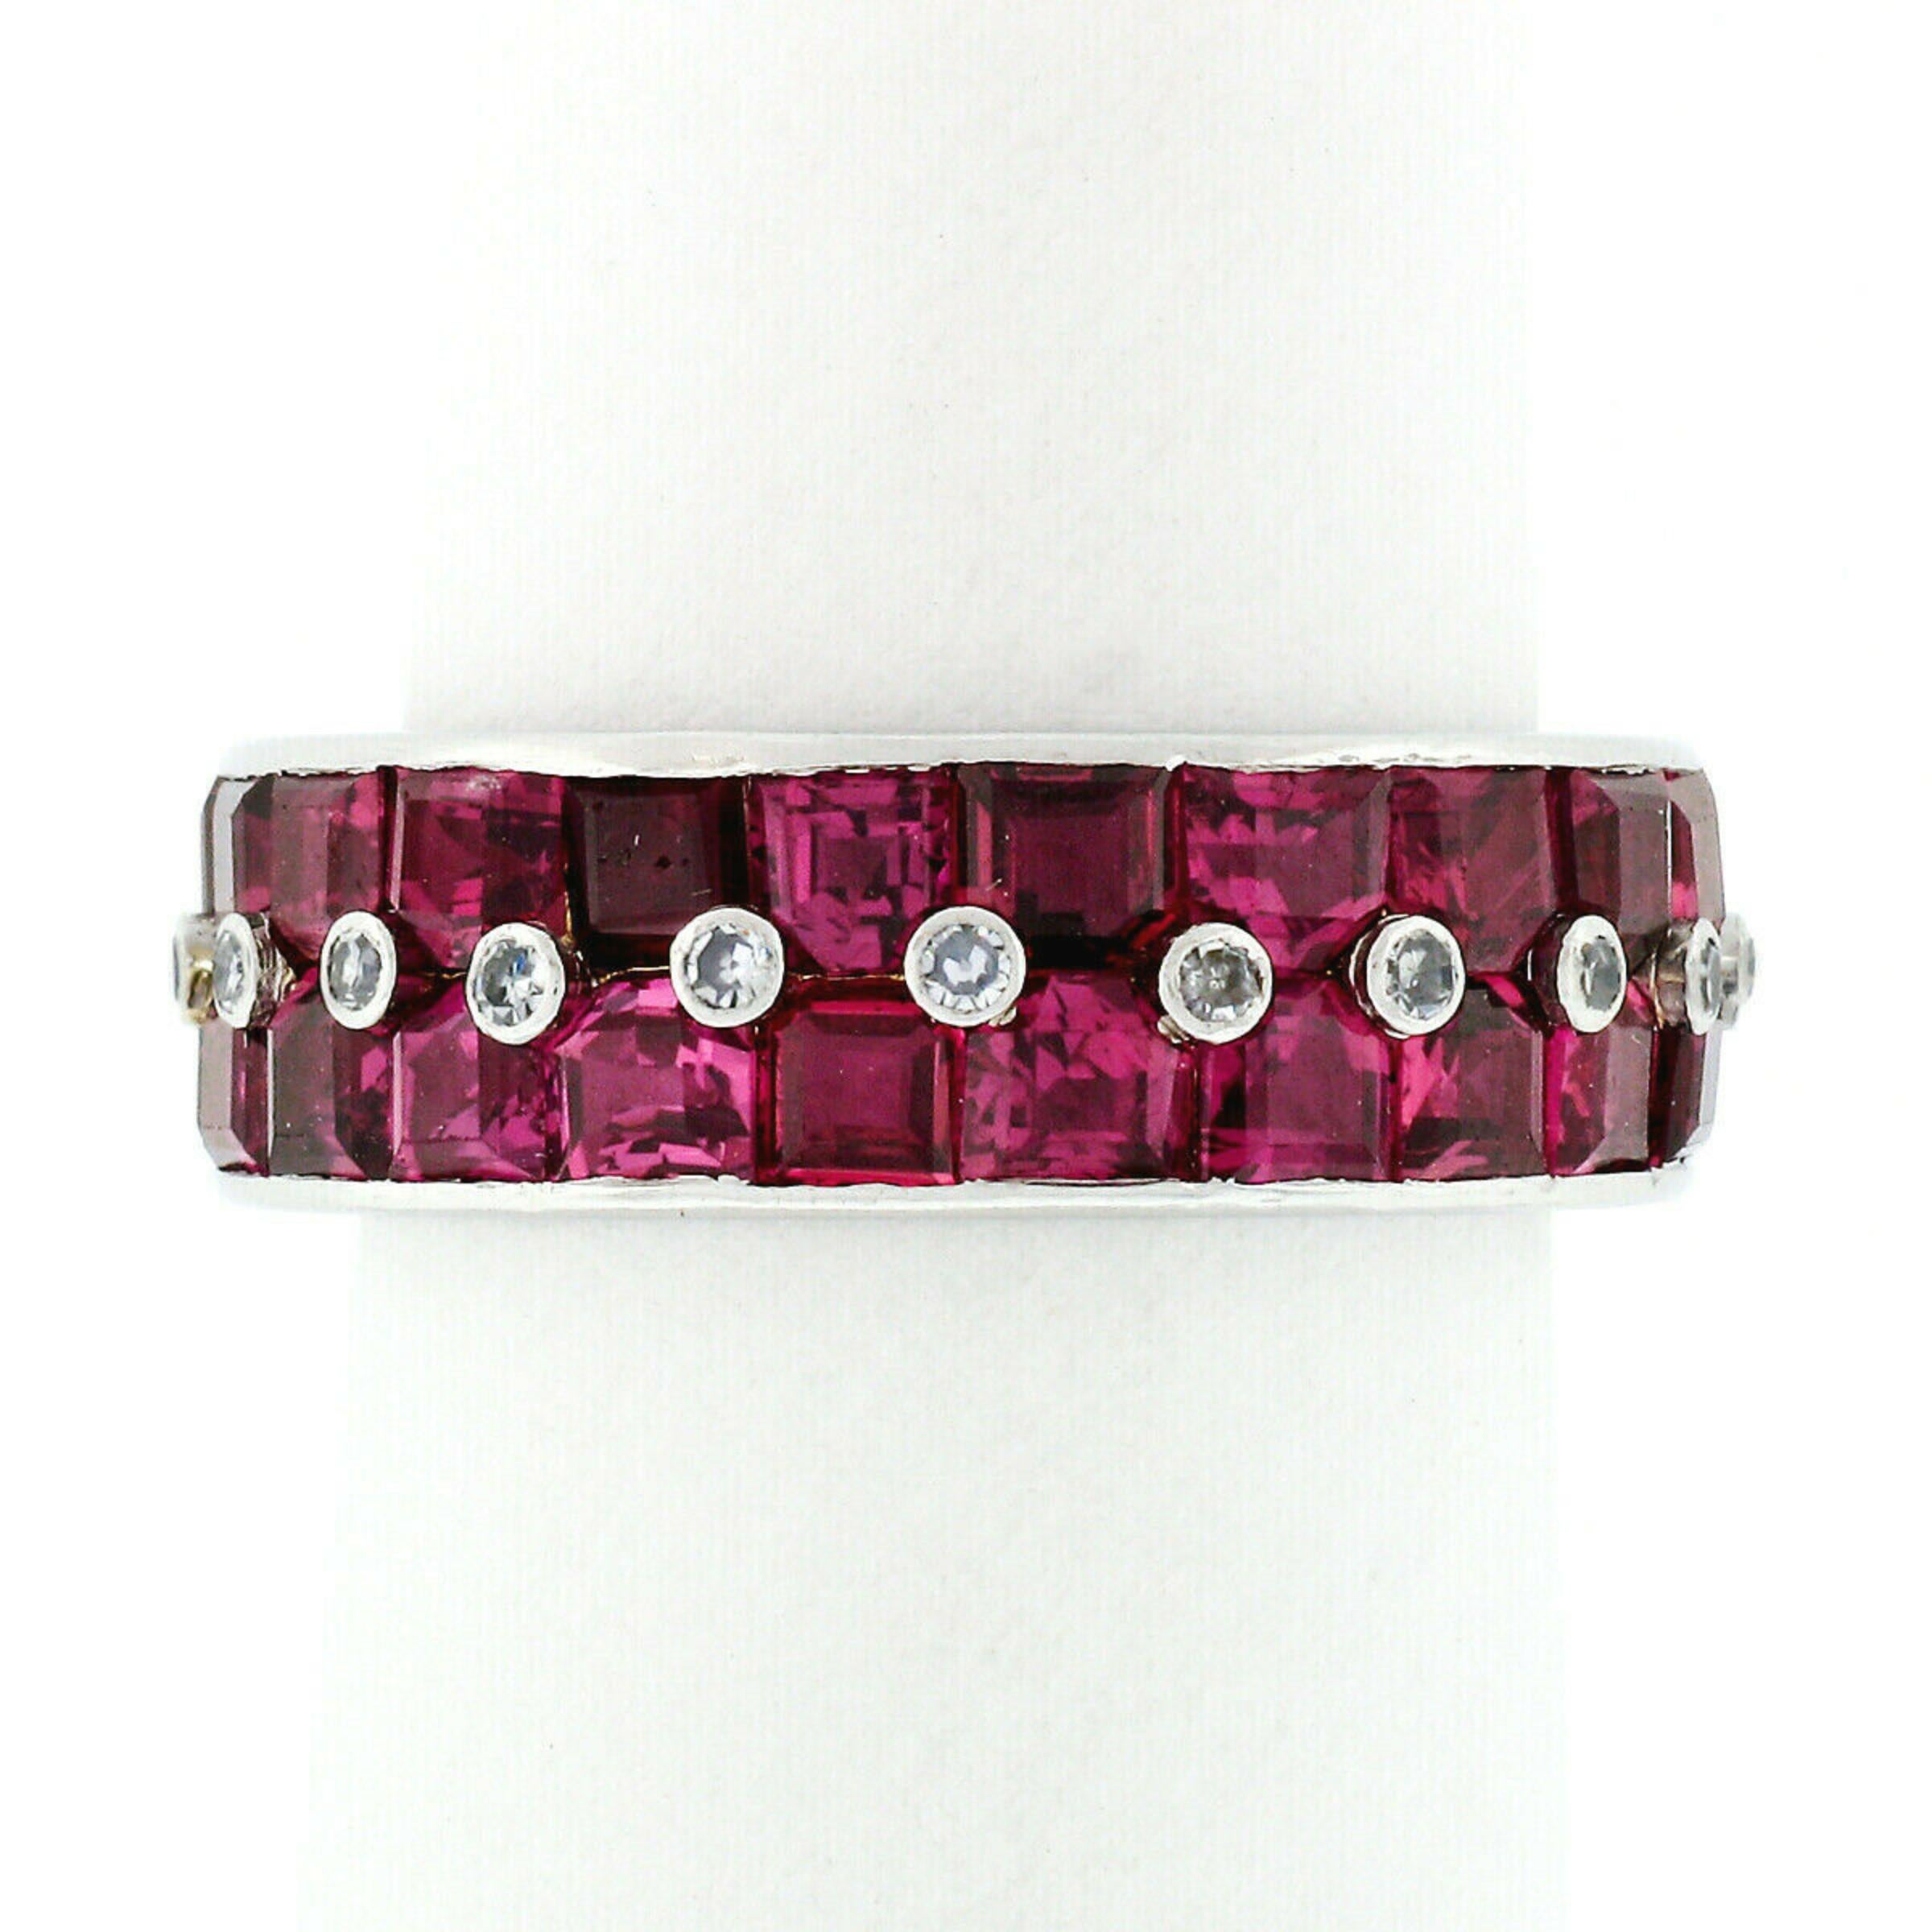 Edwardian Antique Platinum Channel Square Step Cut Ruby & Diamond Wide Eternity Band Ring